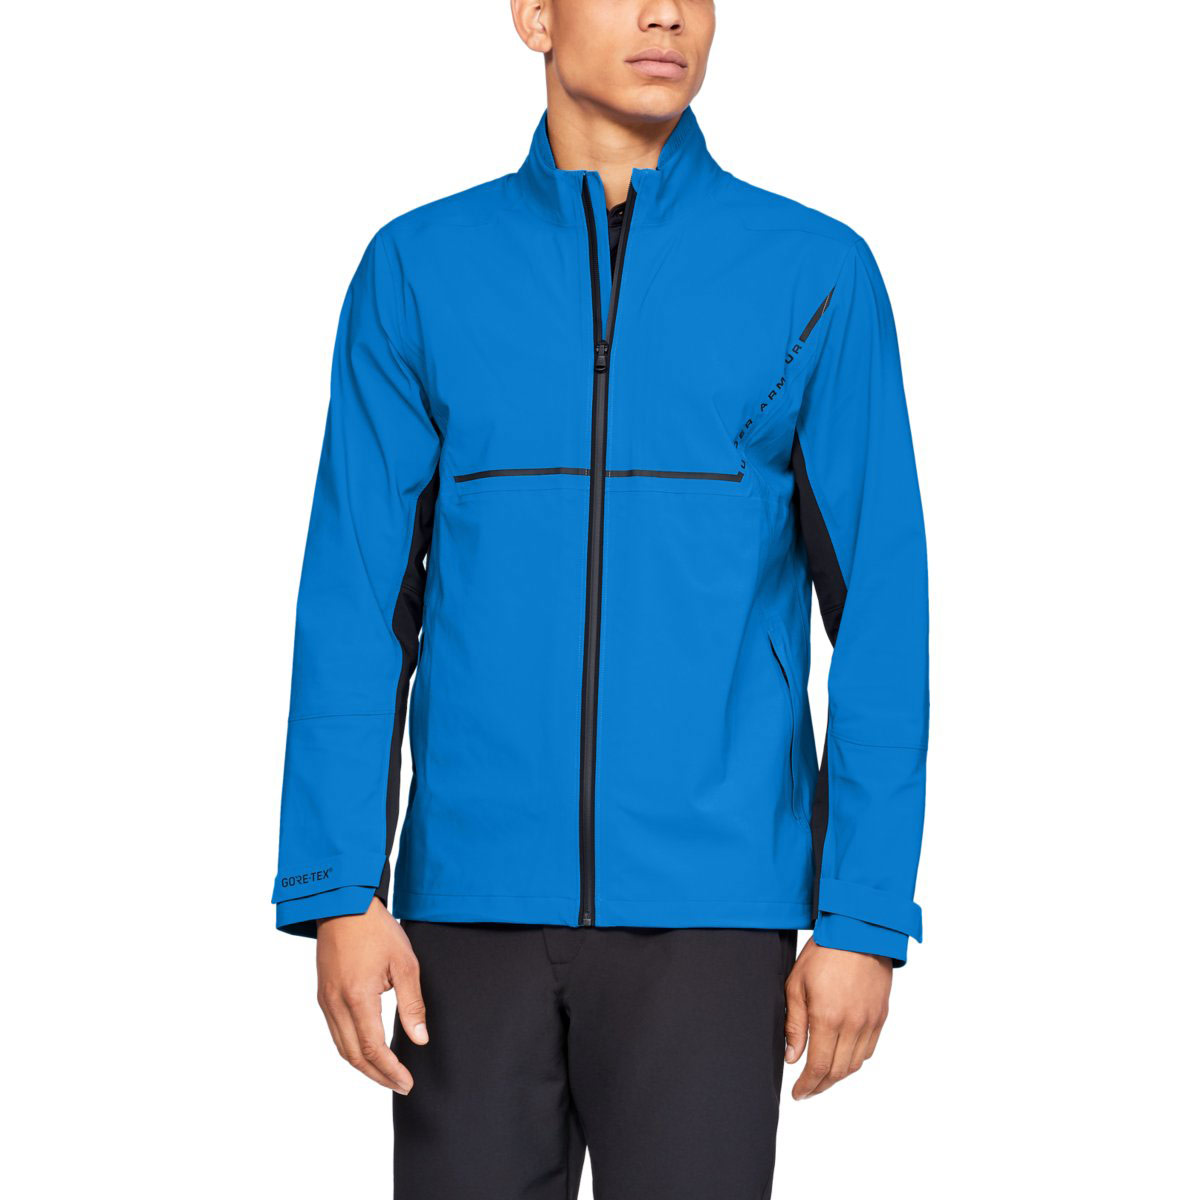 Under Armour Gore Tex Paclite Jacket From American Golf